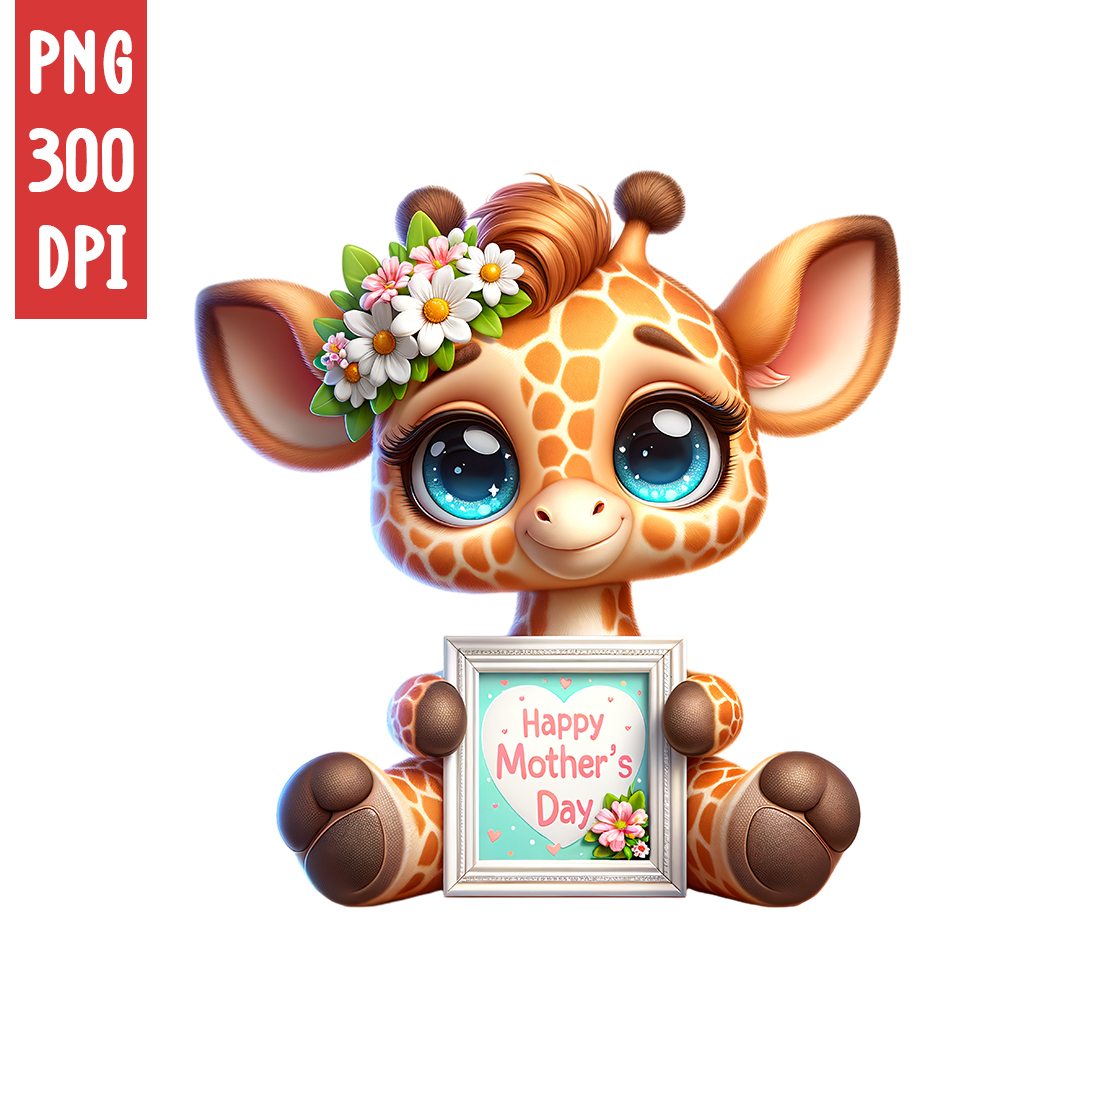 Mother's Day Animal Clipart | Cute Giraffe with frame clipart | PNG cover image.